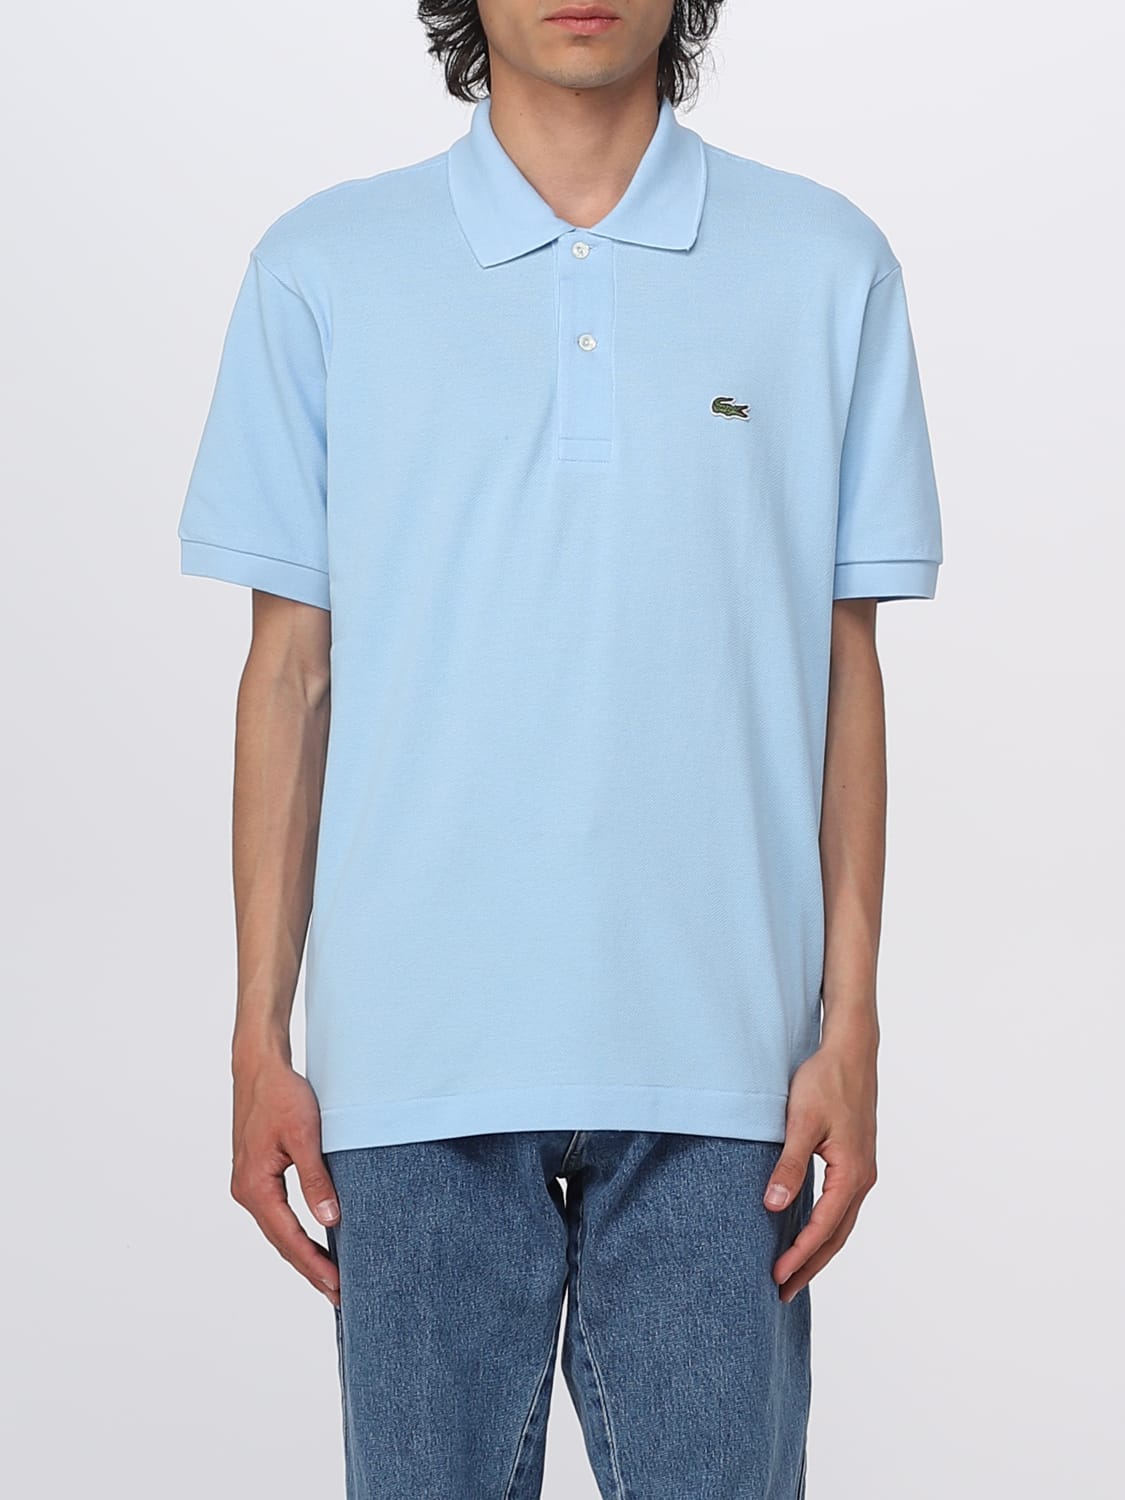 LACOSTE: polo shirt - Ocean | Lacoste polo shirt online on GIGLIO.COM